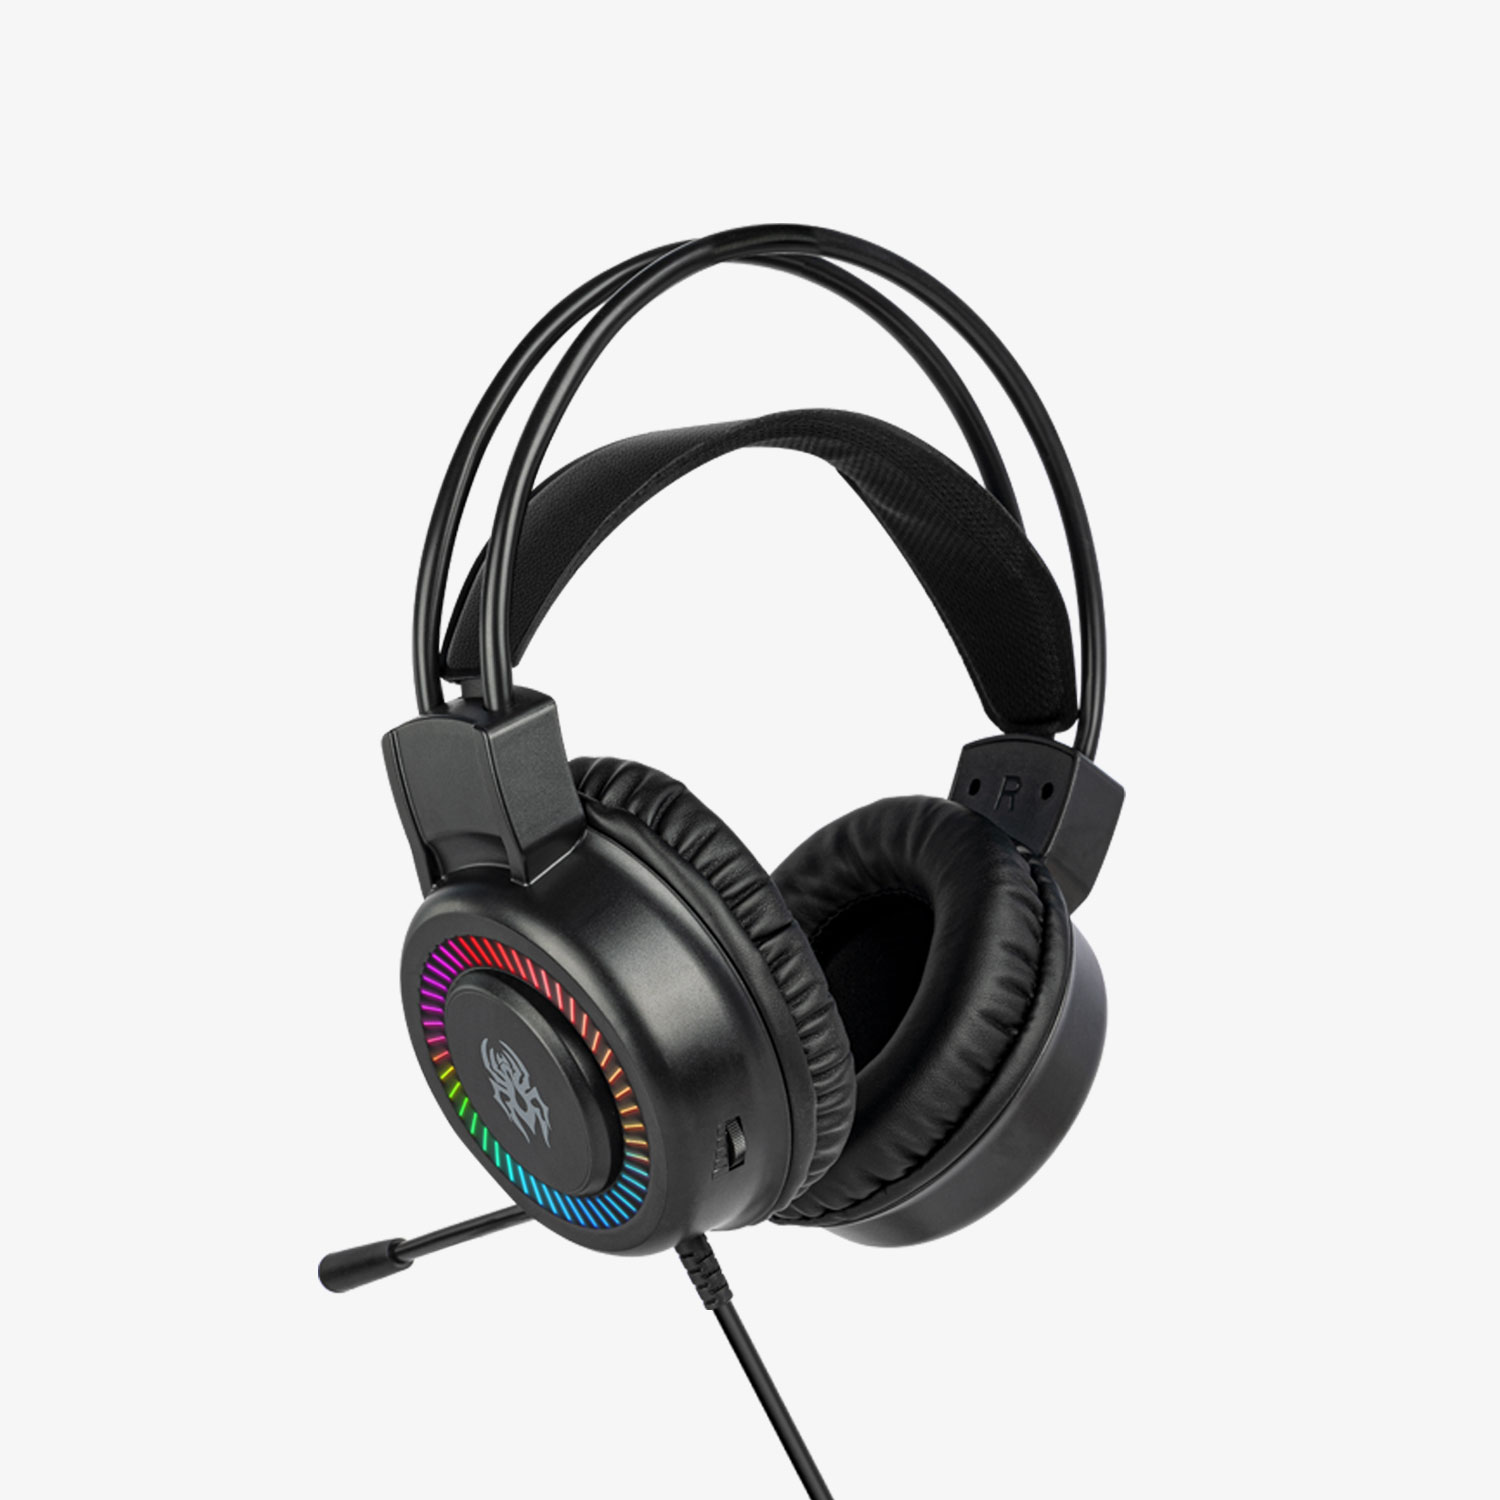 RGB Light gaming headset with Mic